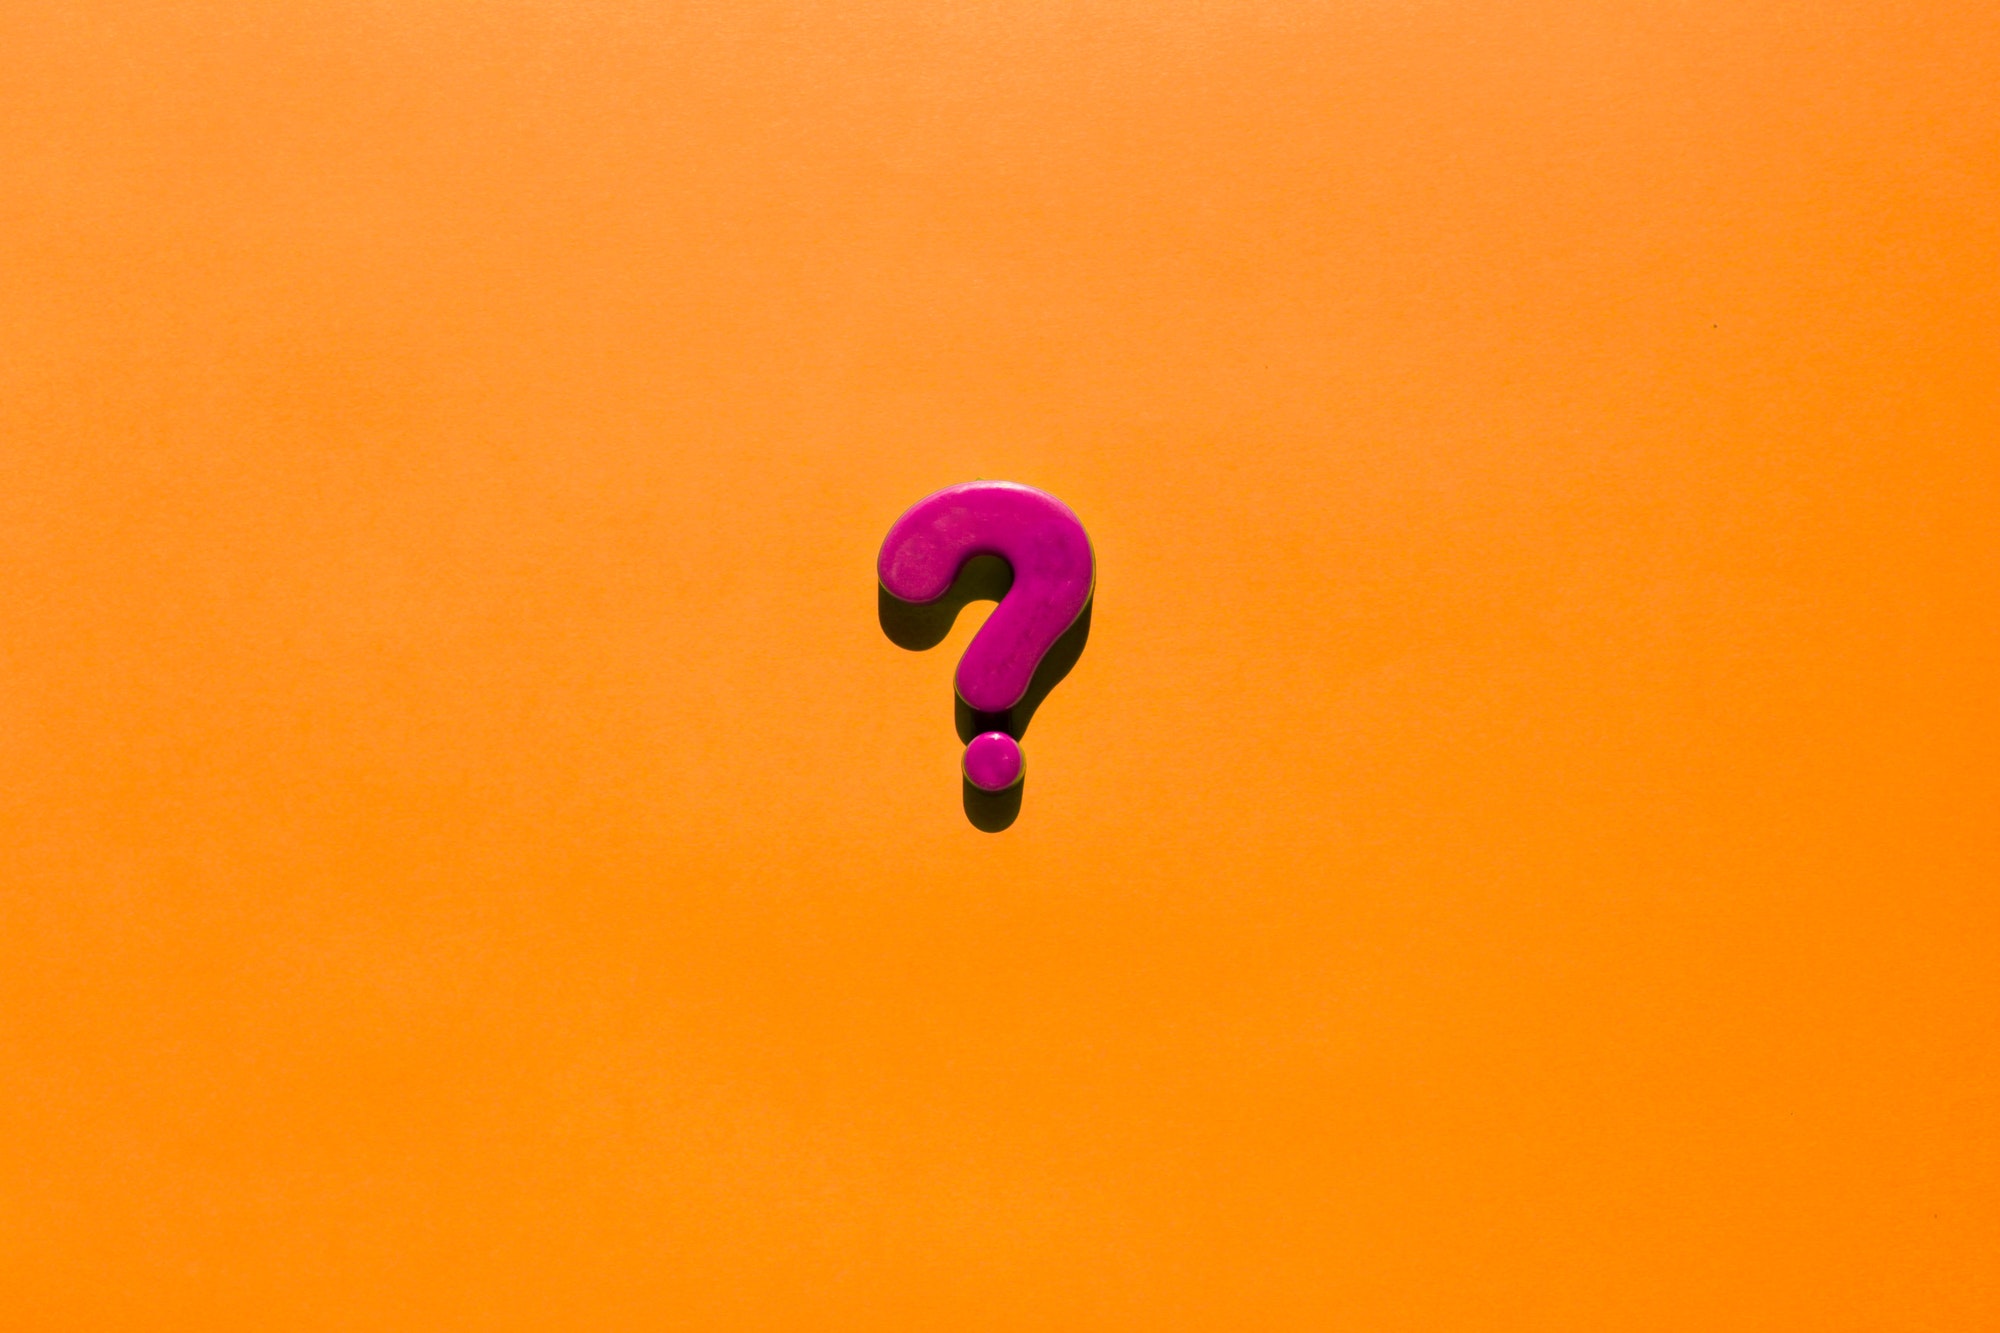 Pink question mark on a orange background